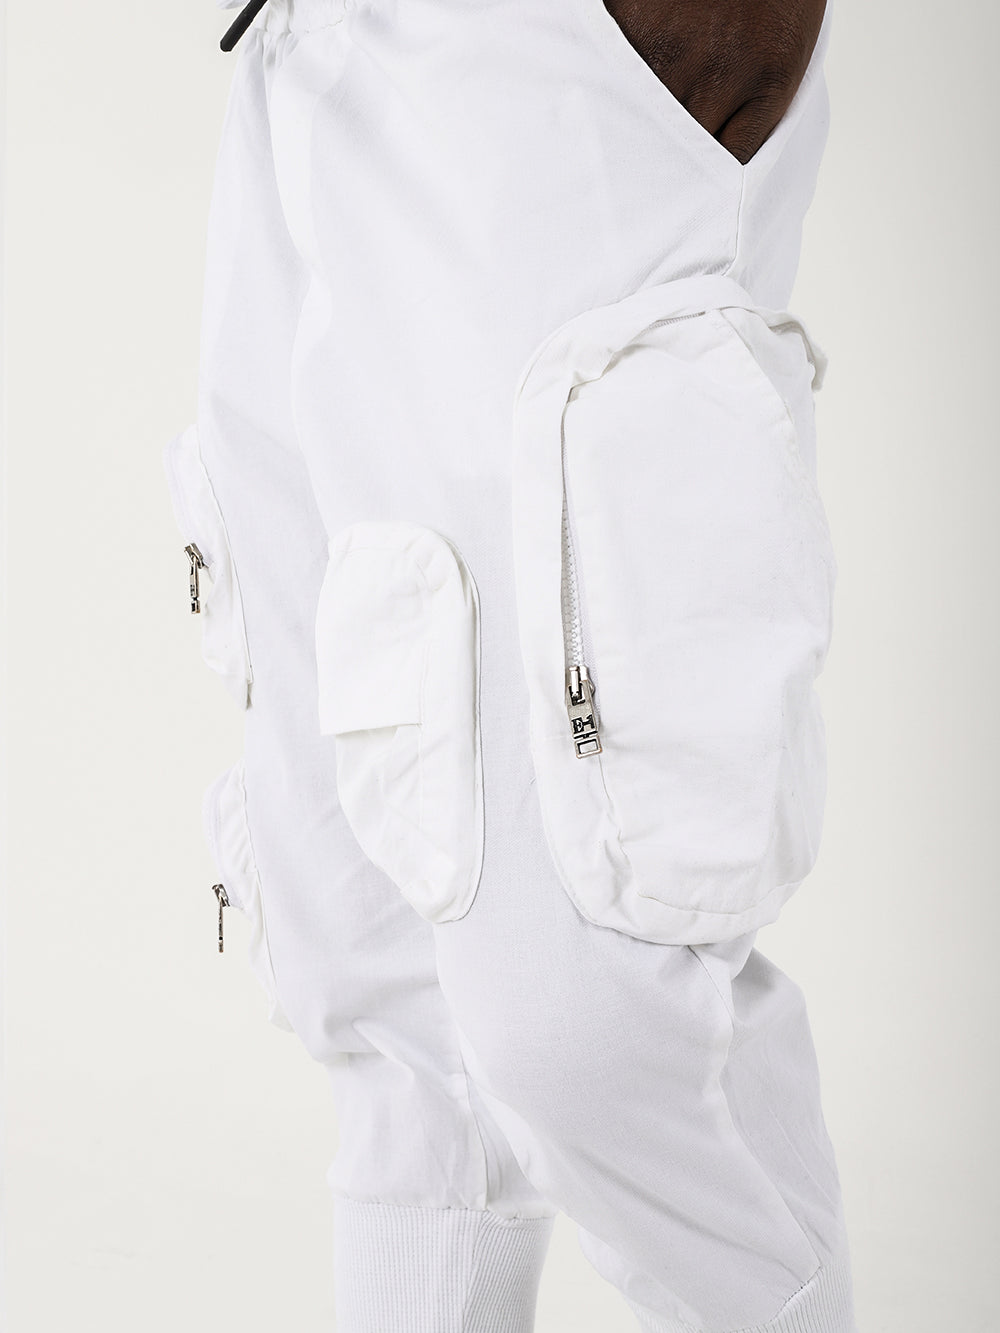 The back of a man wearing white STERLING JOGGERS with adjustable drawstring waist.